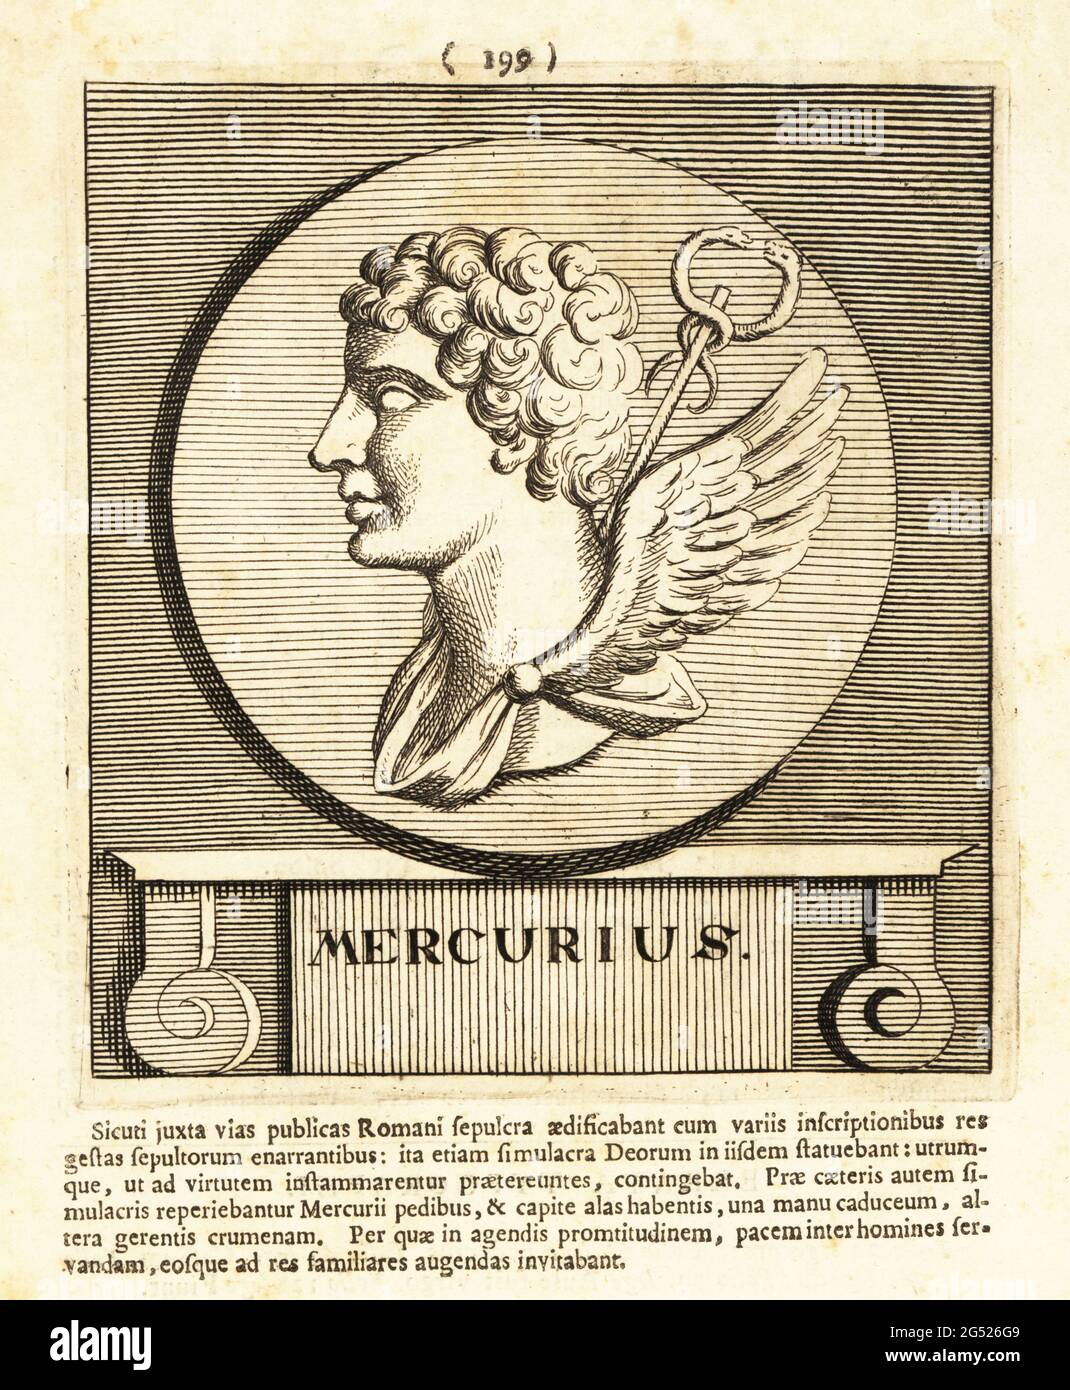 Mercury, Roman god of financial gain, commerce, eloquence, messages, communication, luck, trickery and thieves. In winged robe with caduceus staff with entwined serpents. Hermes in Greek mythology. Mercurius. Copperplate engraving by Pieter Bodart (1676-1712) from Henricus Spoor’s Deorum et Heroum, Virorum et Mulierum Illustrium Imagines Antiquae Illustatae, Gods and Heroes, Men and Women, Illustrated with Antique Images, Petrum, Amsterdam, 1715. First published as Favissæ utriusque antiquitatis tam Romanæ quam Græcæ in 1707. Henricus Spoor was a Dutch physician, classical scholar, poet and wr Stock Photo